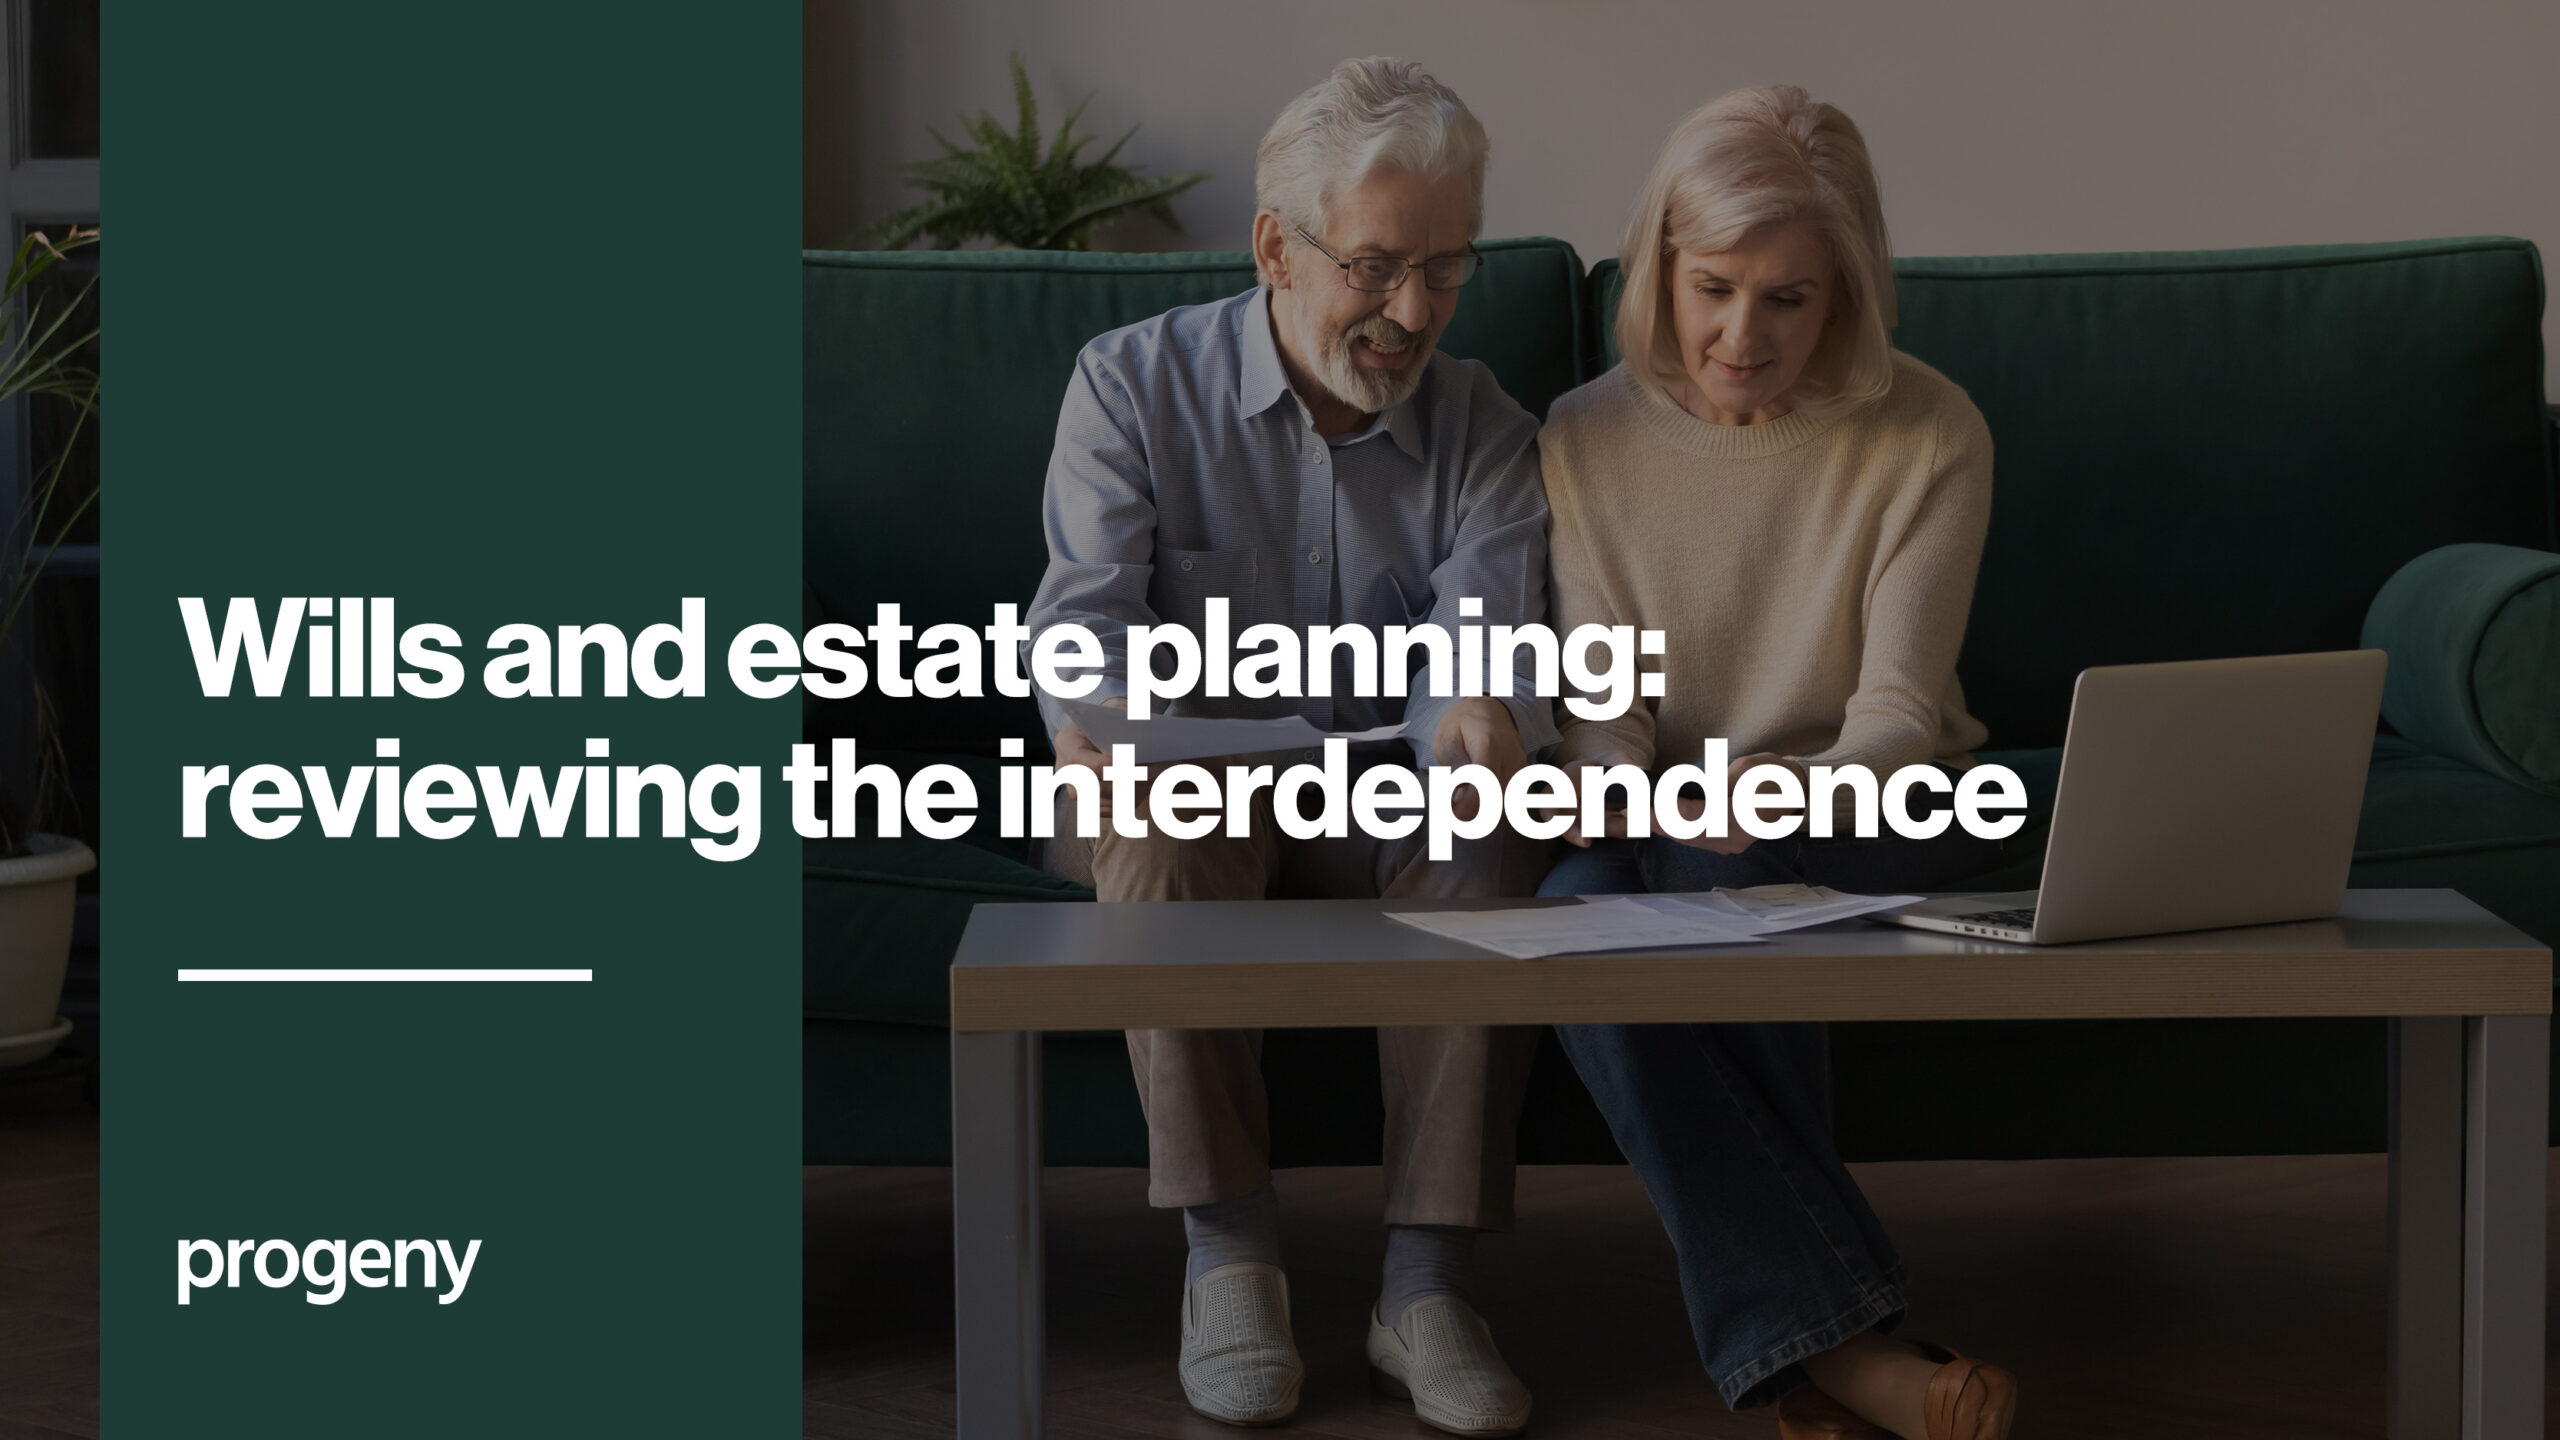 Wills and estate planning- reviewing the interdependence